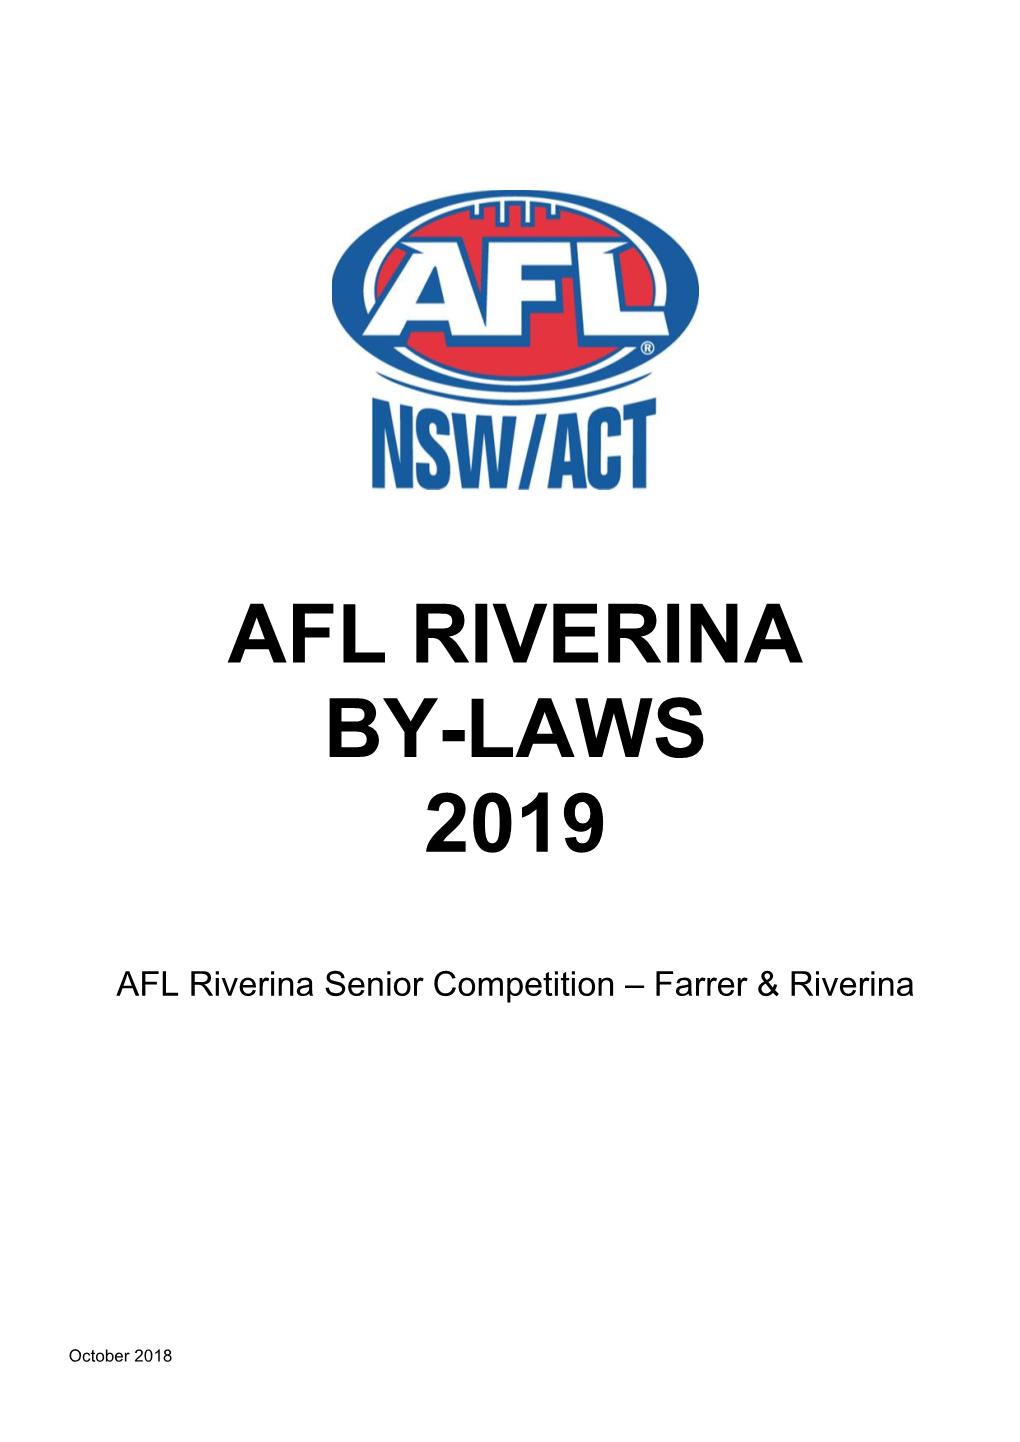 Afl Riverina By-Laws 2019